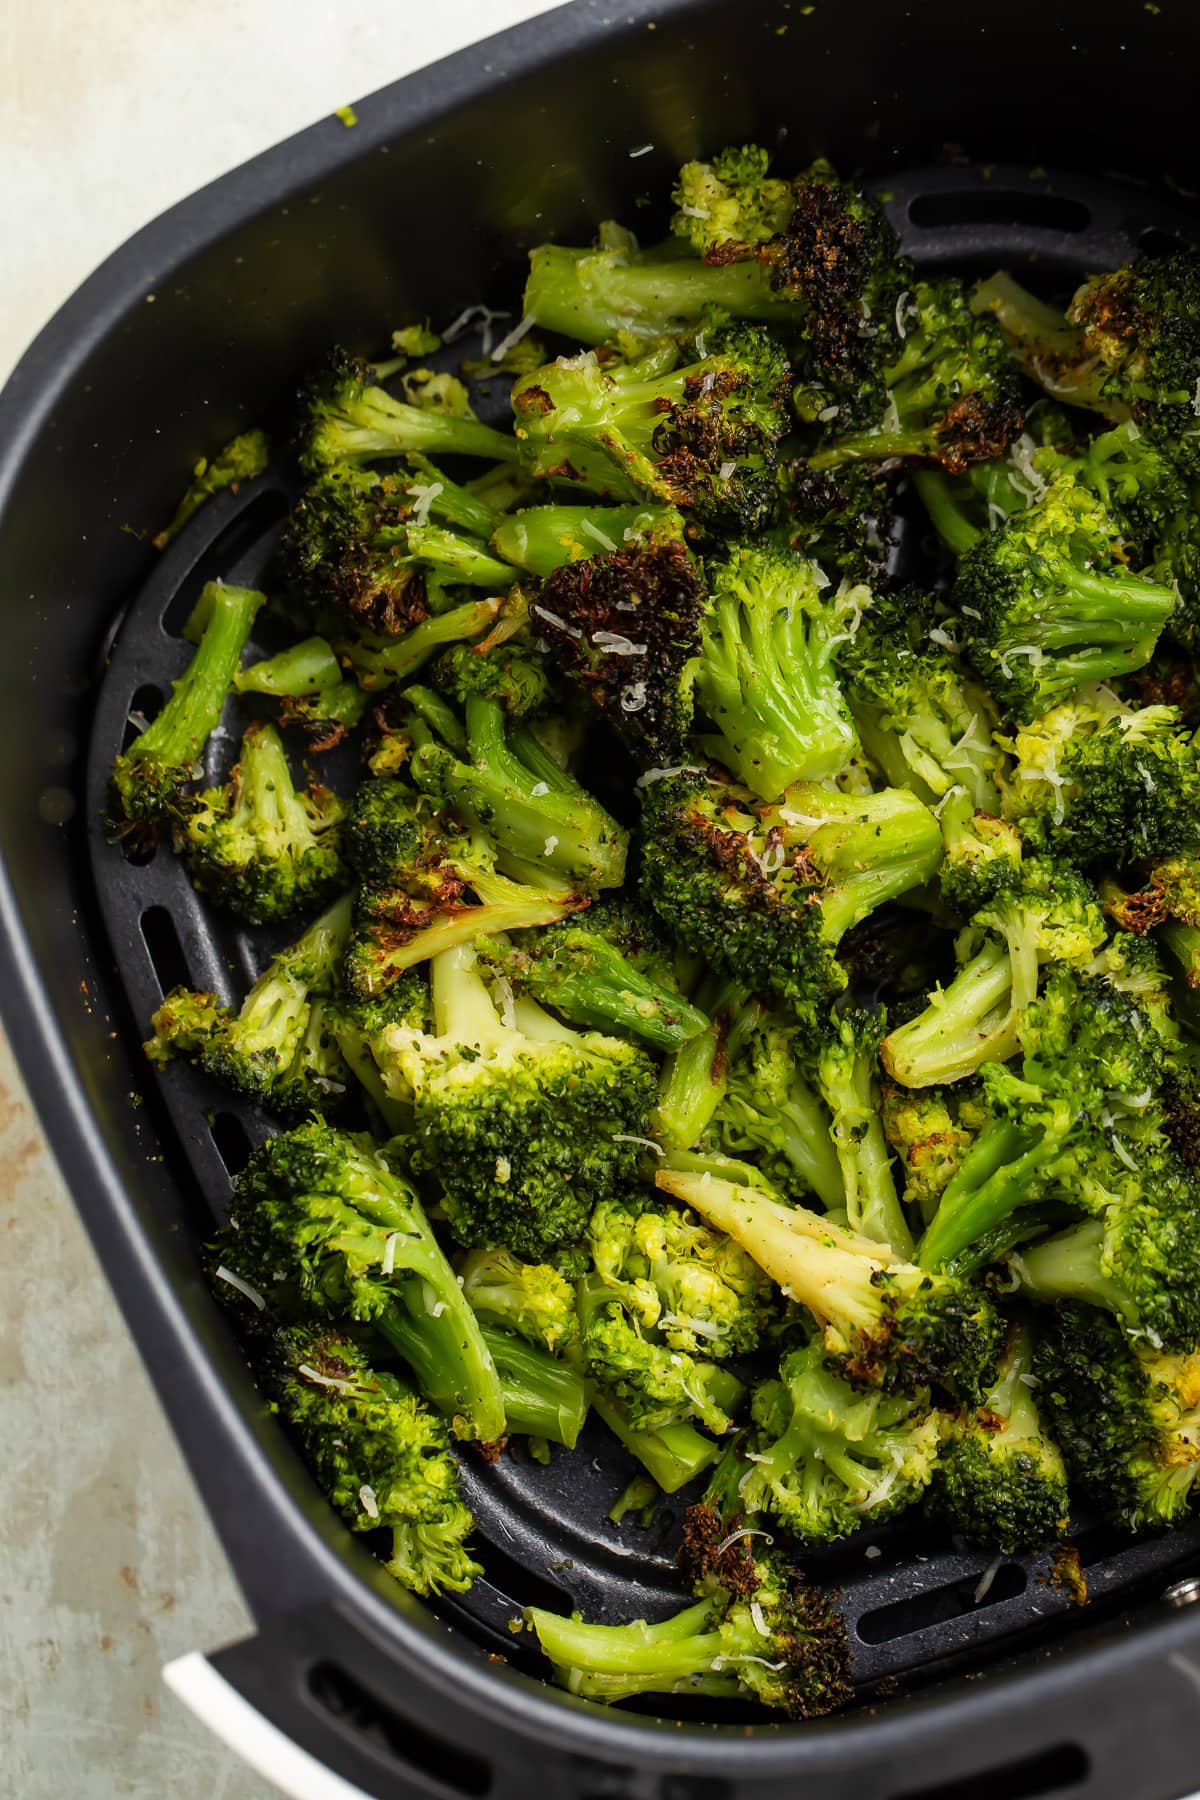 Previously frozen broccoli florets, resting in an air fryer basket after being cooked until some spots are dark brown and crisp.